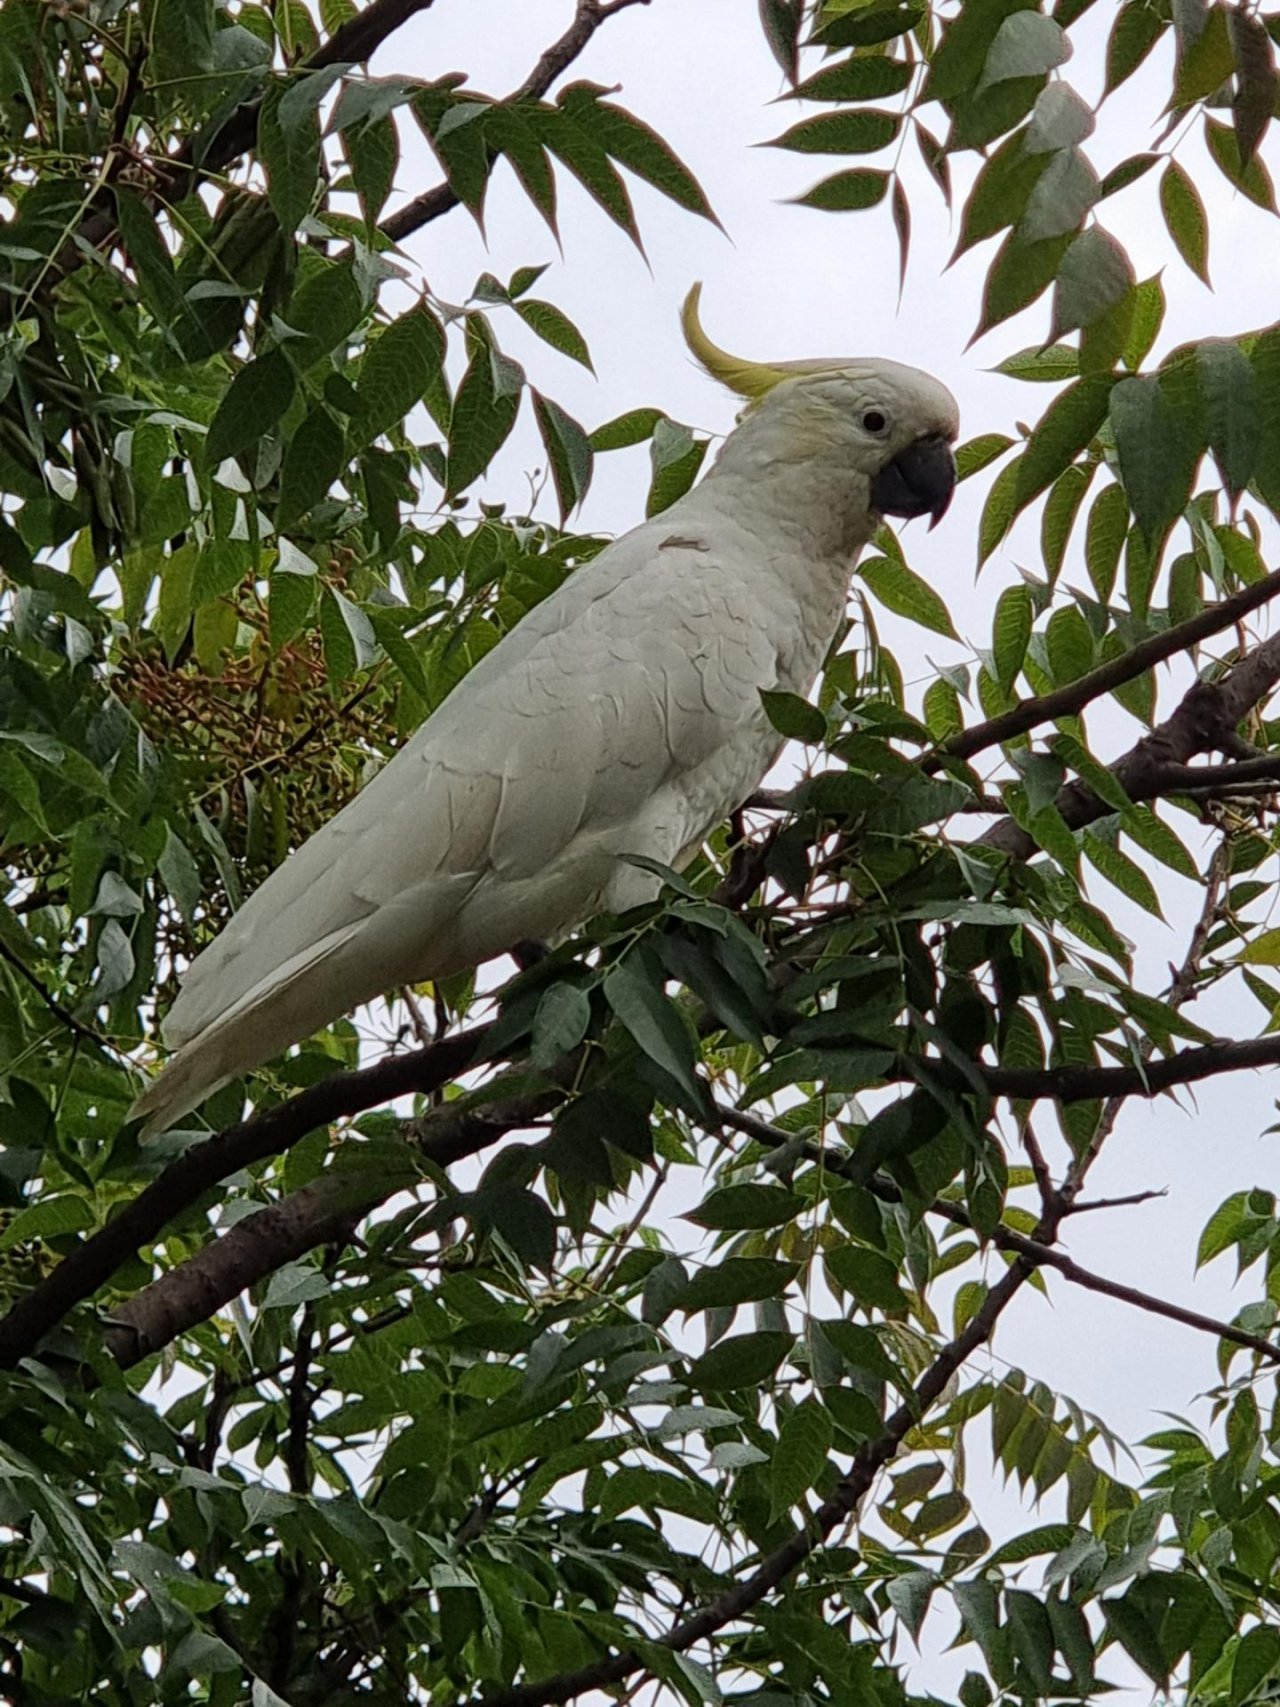 Sulphur-crested Cockatoo in Big City Birds App spotted by Melissa McEwen on 05.02.2021